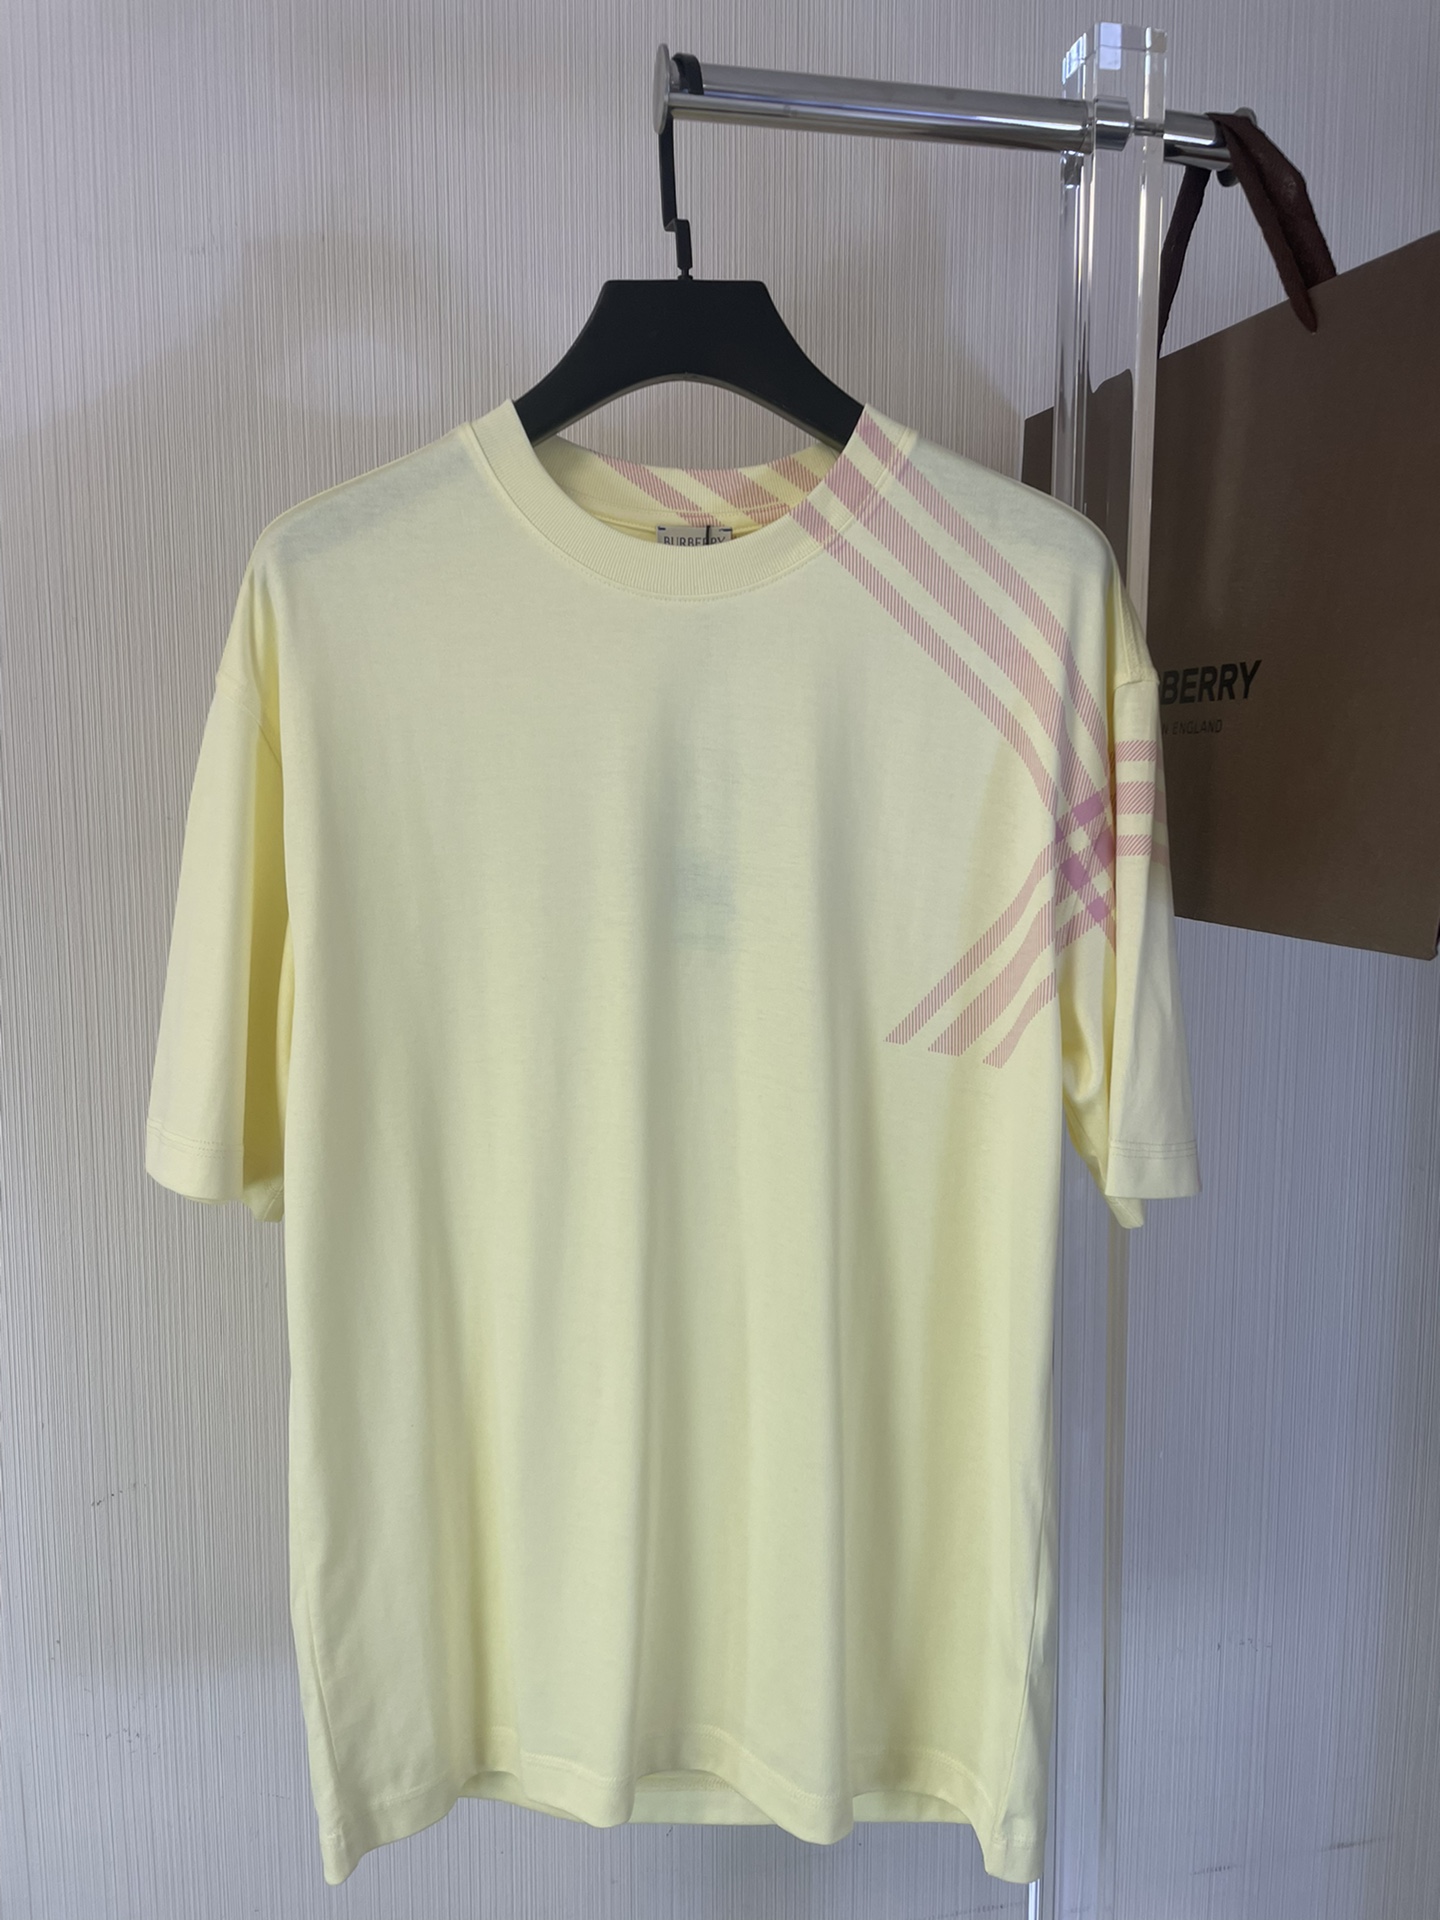 Burberry Clothing T-Shirt Buy Cheap
 Printing Combed Cotton